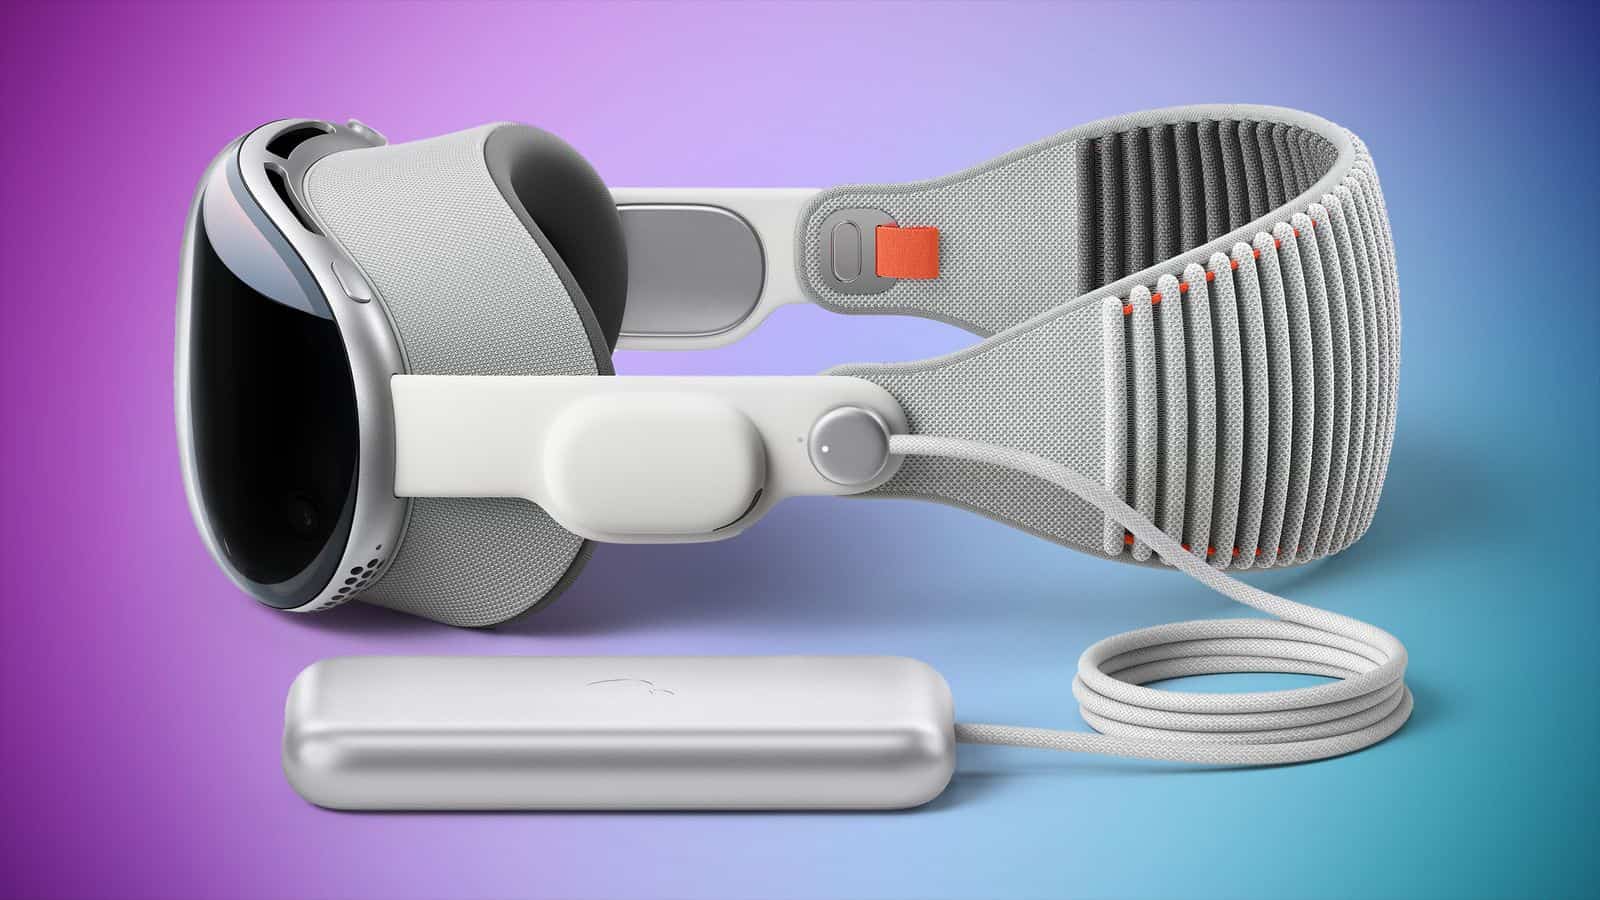 Apple Has New Announcement: Apple Vision Pro XR Headset